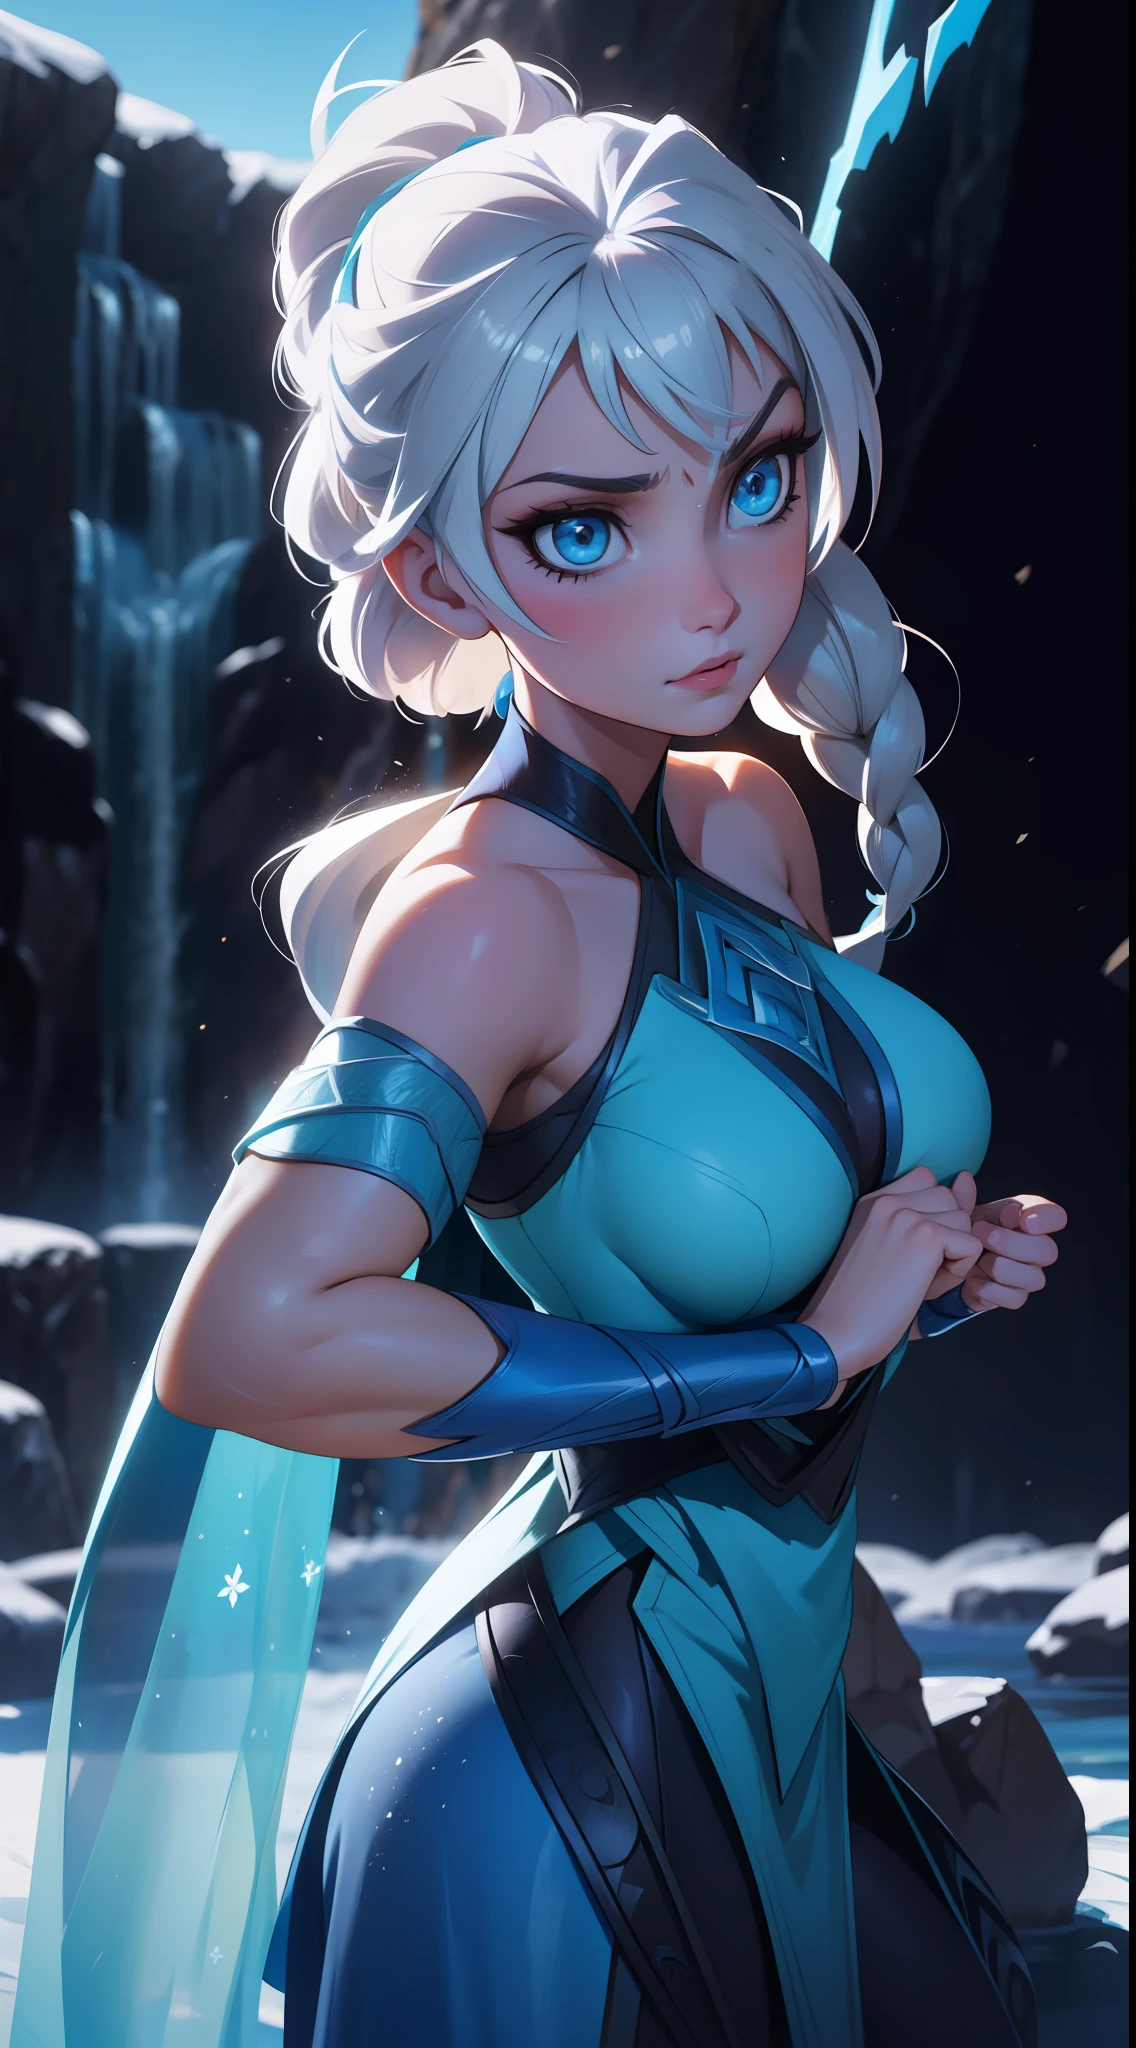 Elsa-Sub-zero Fusion, Elsa&#39;s white hair, Sub-zero clothes, ice particles, melting, 1girl, Beautiful, (master part:1.2), (best qualityer:1.2), ((struggling pose)), ((field of battle)), cinemactic, perfects eyes, perfect  skin, perfect lighting, sorrido, Lumiere, Farbe, texturized skin, detail, Beauthfull, wonder wonder wonder wonder wonder wonder wonder wonder wonder wonder wonder wonder wonder wonder wonder wonder wonder wonder wonder wonder wonder wonder wonder wonder wonder wonder wonder wonder wonder wonder wonder wonder, ultra detali, face perfect